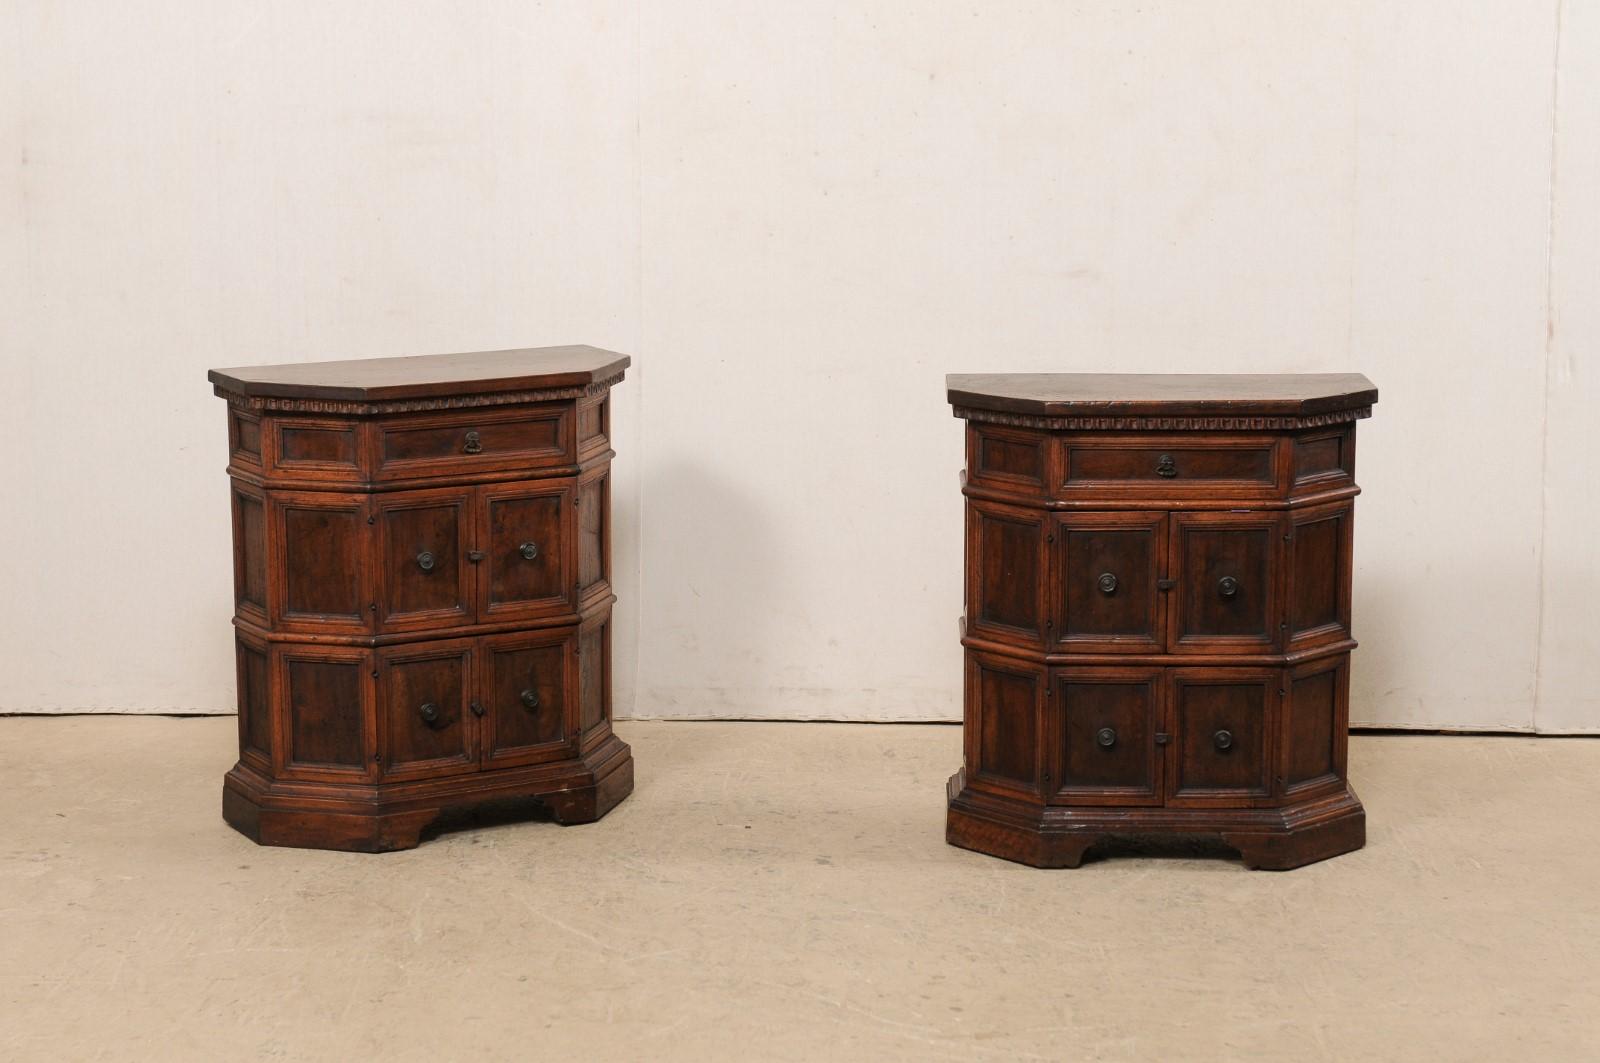 An Italian pair of petite sized console cabinets from the early 19th century. This antique pair of chests from Italy each have beautifully molded and recessed panels adorning their bodies, with egg-n-dart carved trim beneath the top with it's